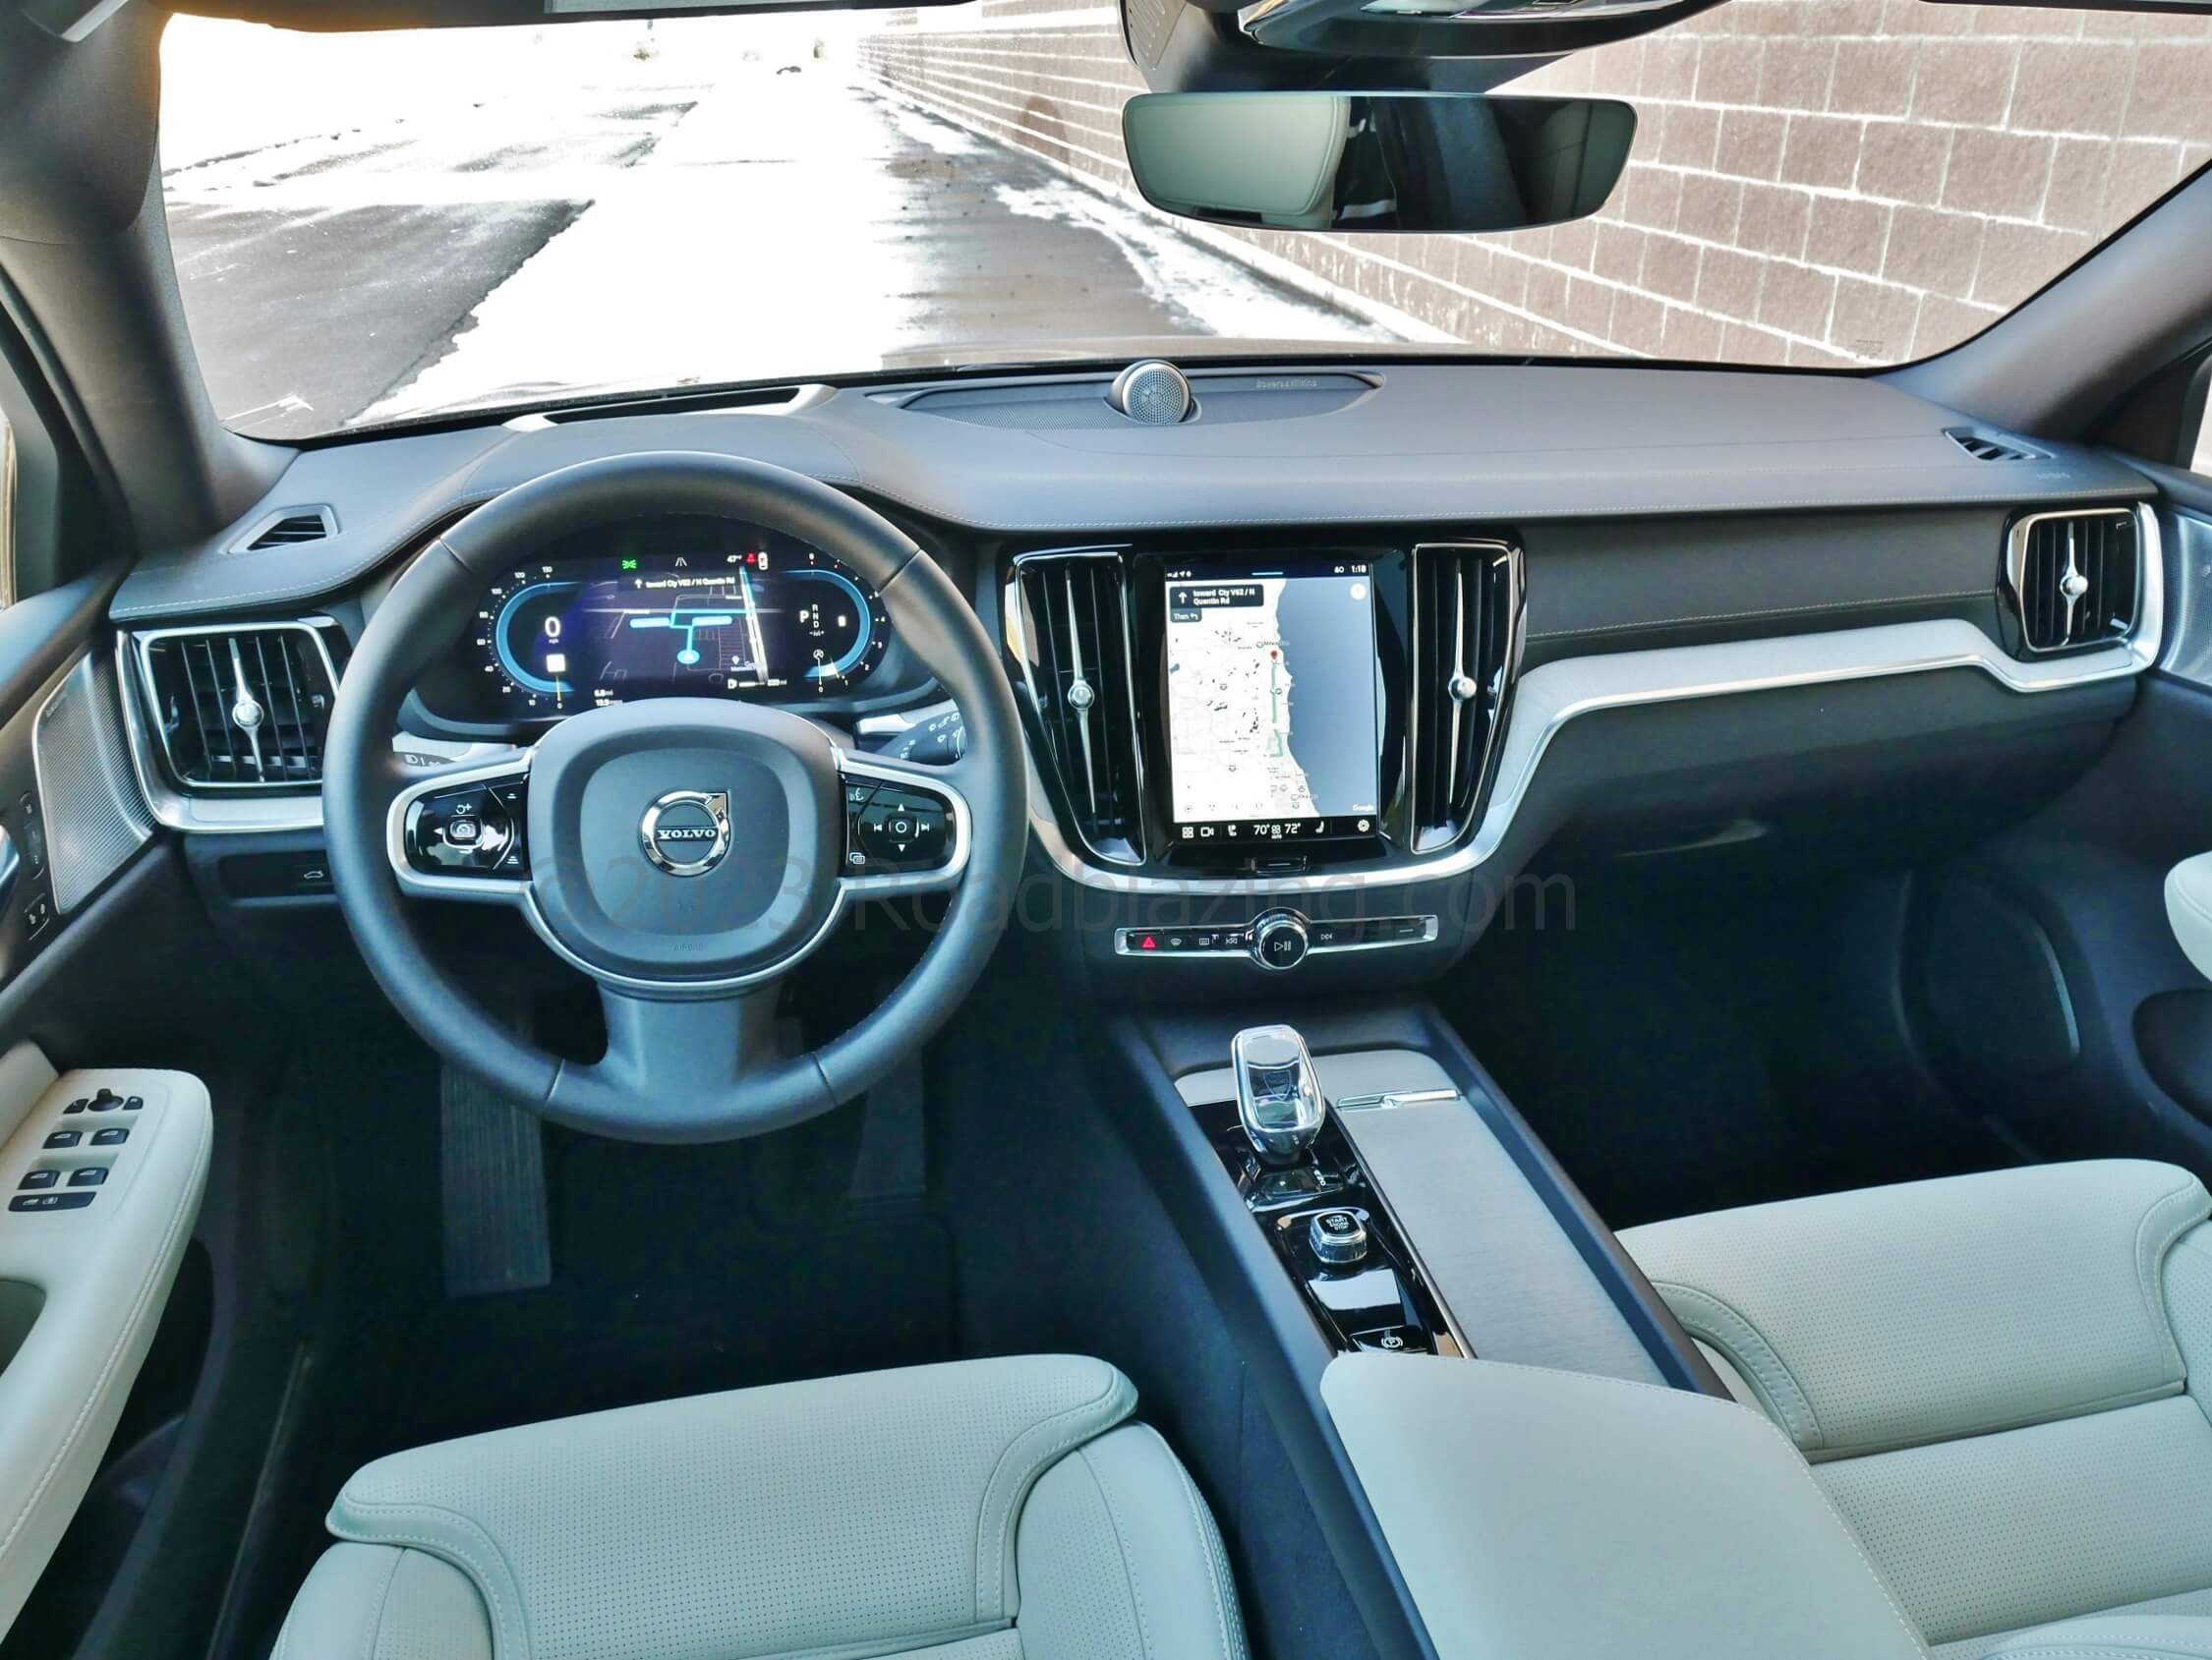 2023 Volvo V60 Cross Country B5 Ultimate AWD: cockpit now operates on Android Automotive for 12.3" TFT progressive instrument cluster & 9.0" portrait touch LCD infotainment screen featuring Google Assistant voice control